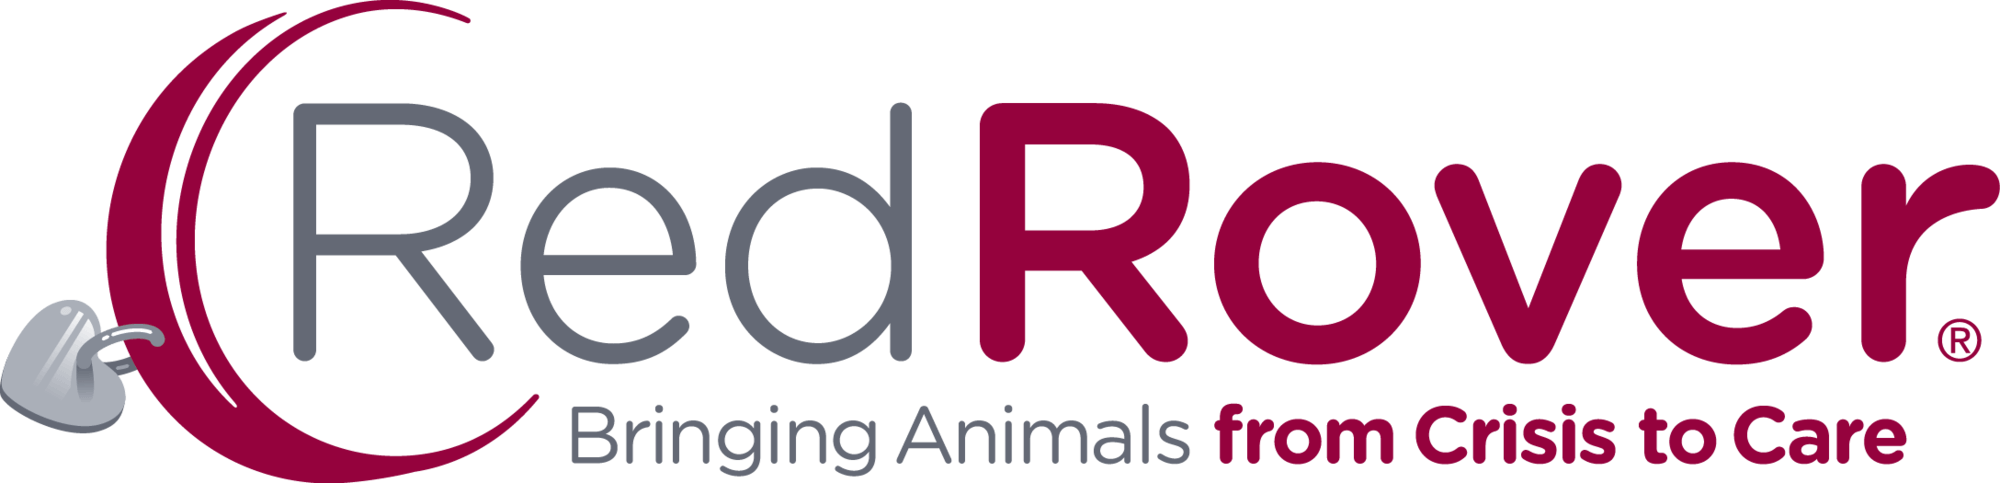 Teaming up to help animals in Southern California